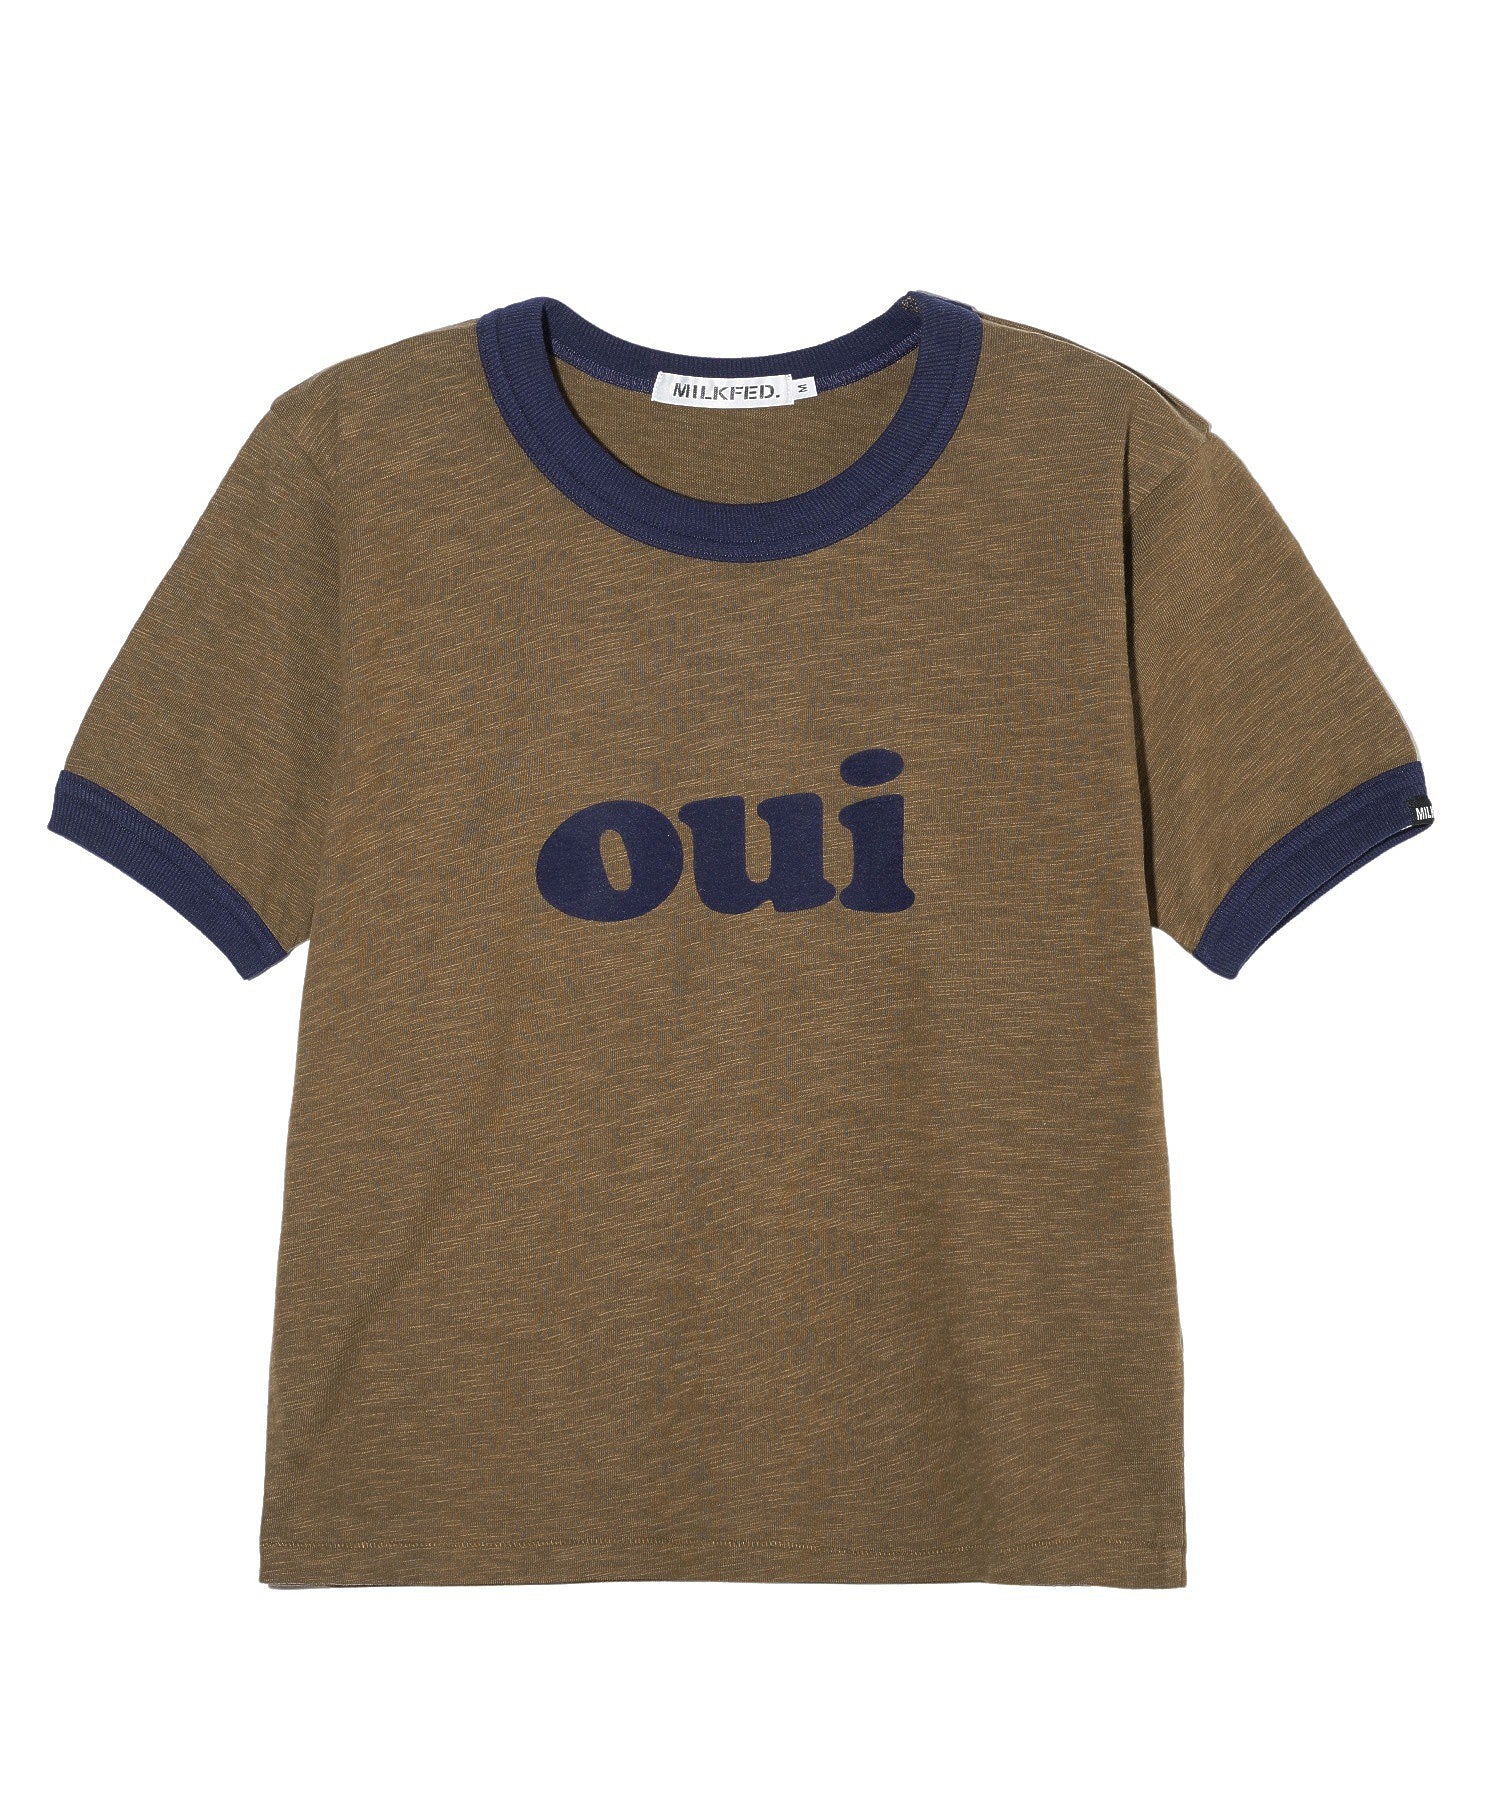 OUI SLAB COMPACT S/S RINGER TEE